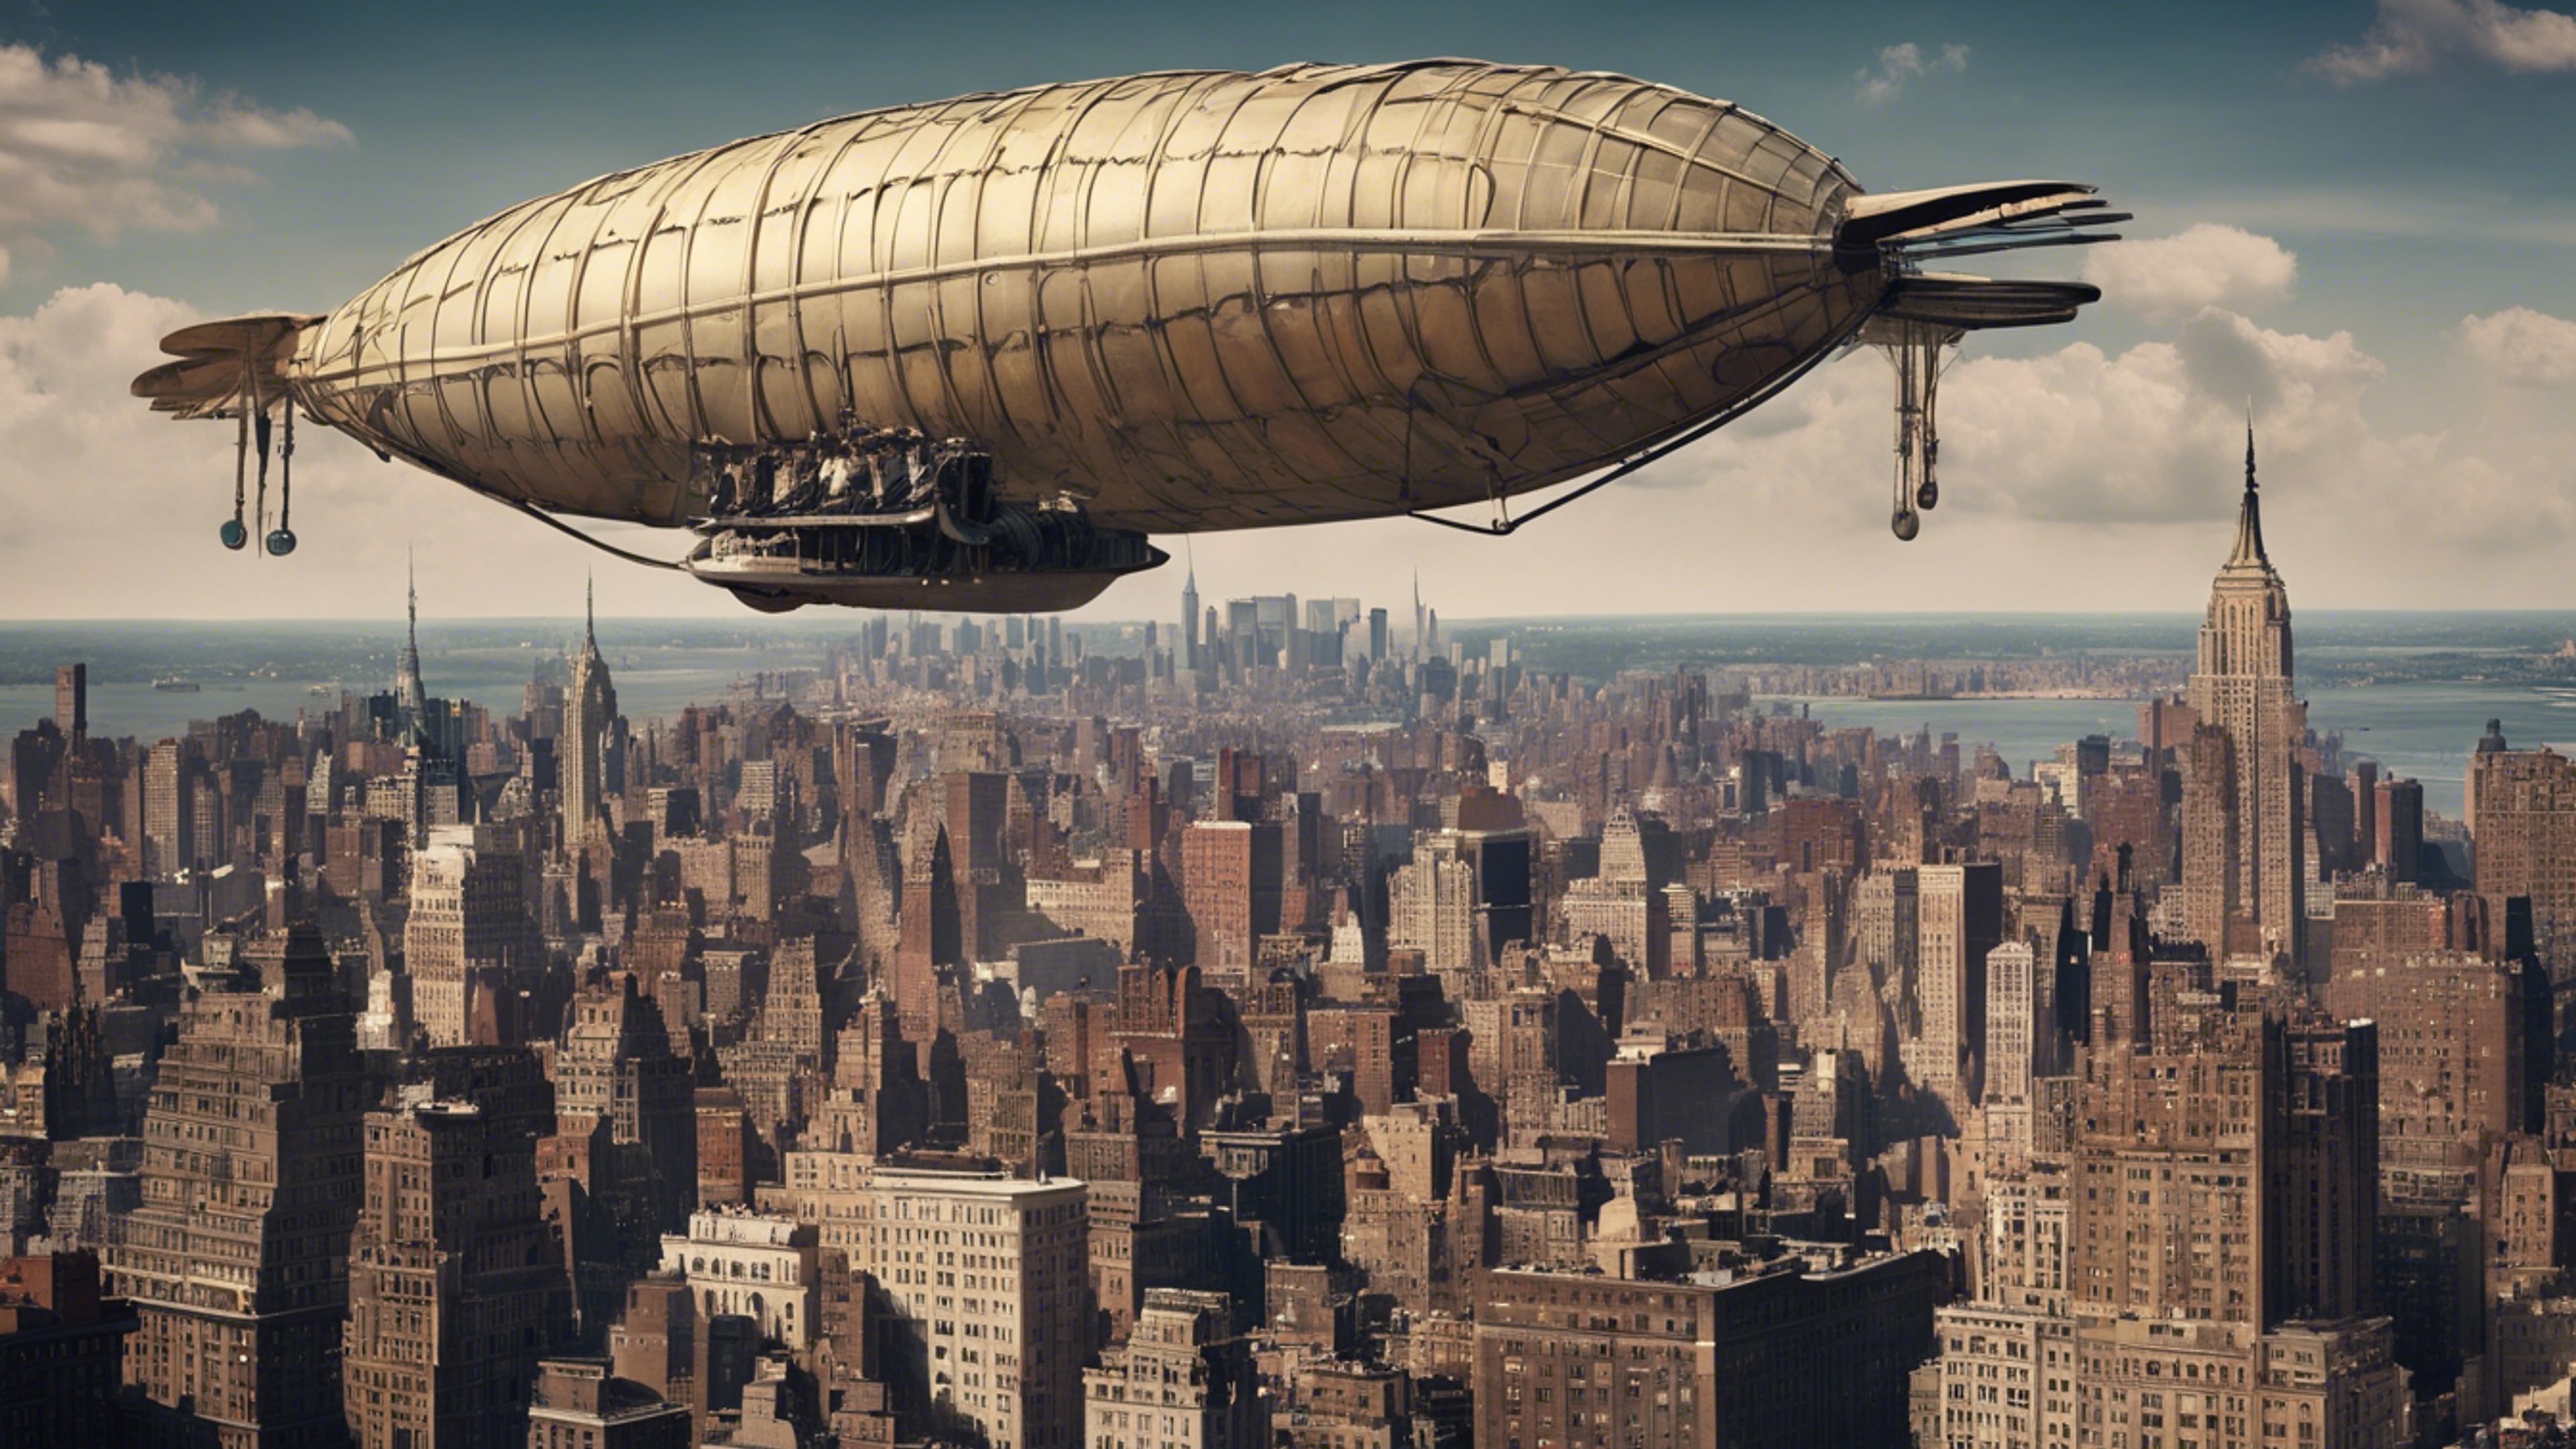 A nostalgic skyline view of 1920s New York City, peppered with zeppelins. Tapet[5c42609b28fb4c129601]